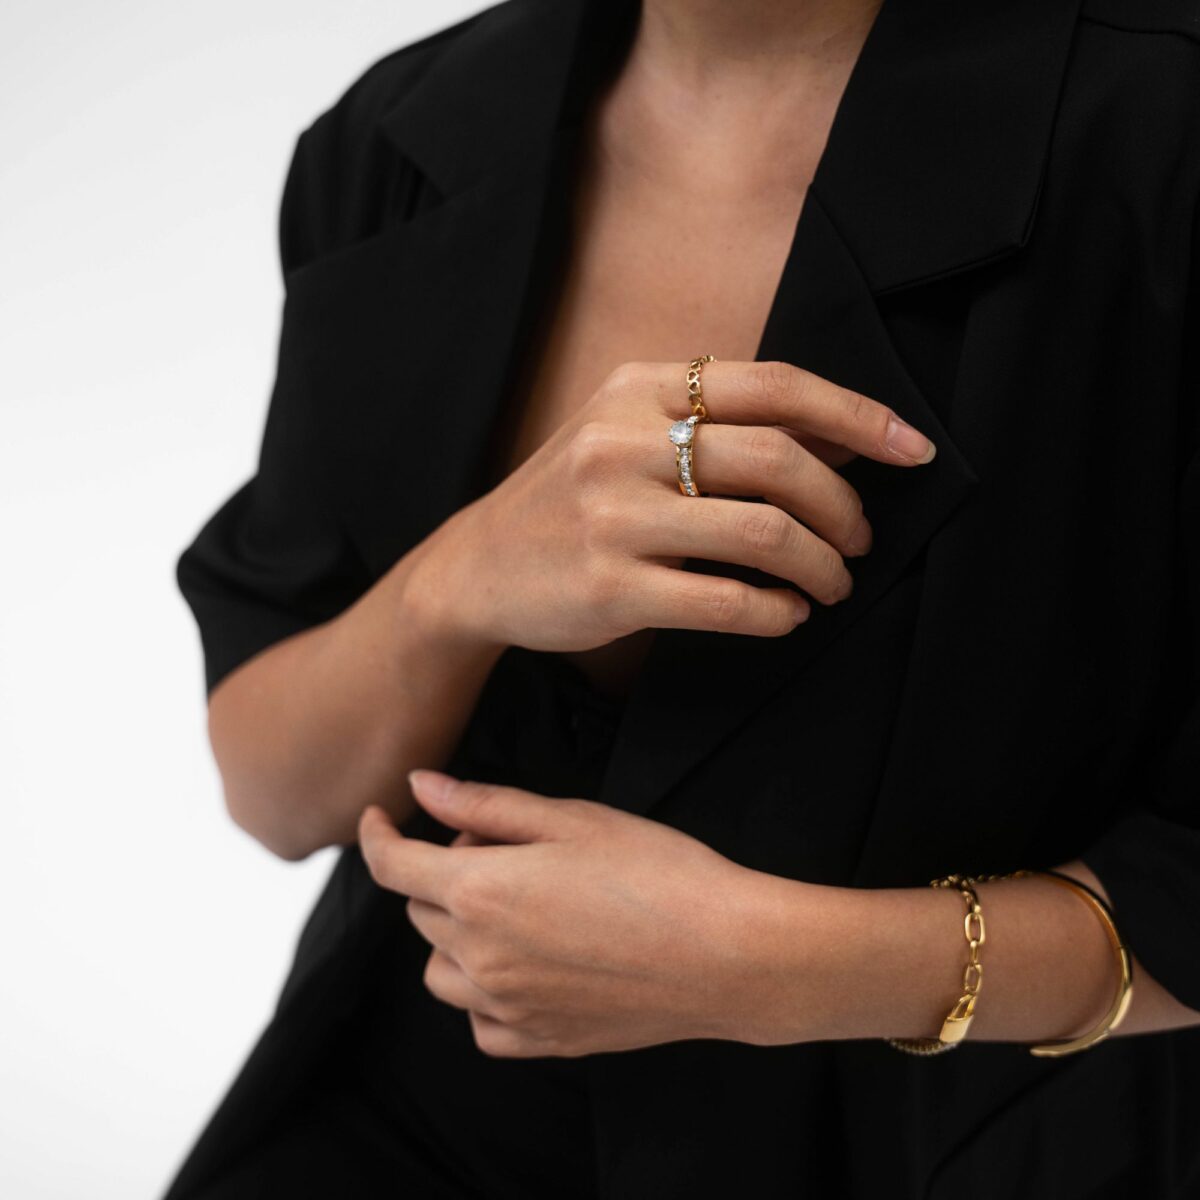 https://m.clubbella.co/product/gold-infinity-heart-ring/ DSC00028